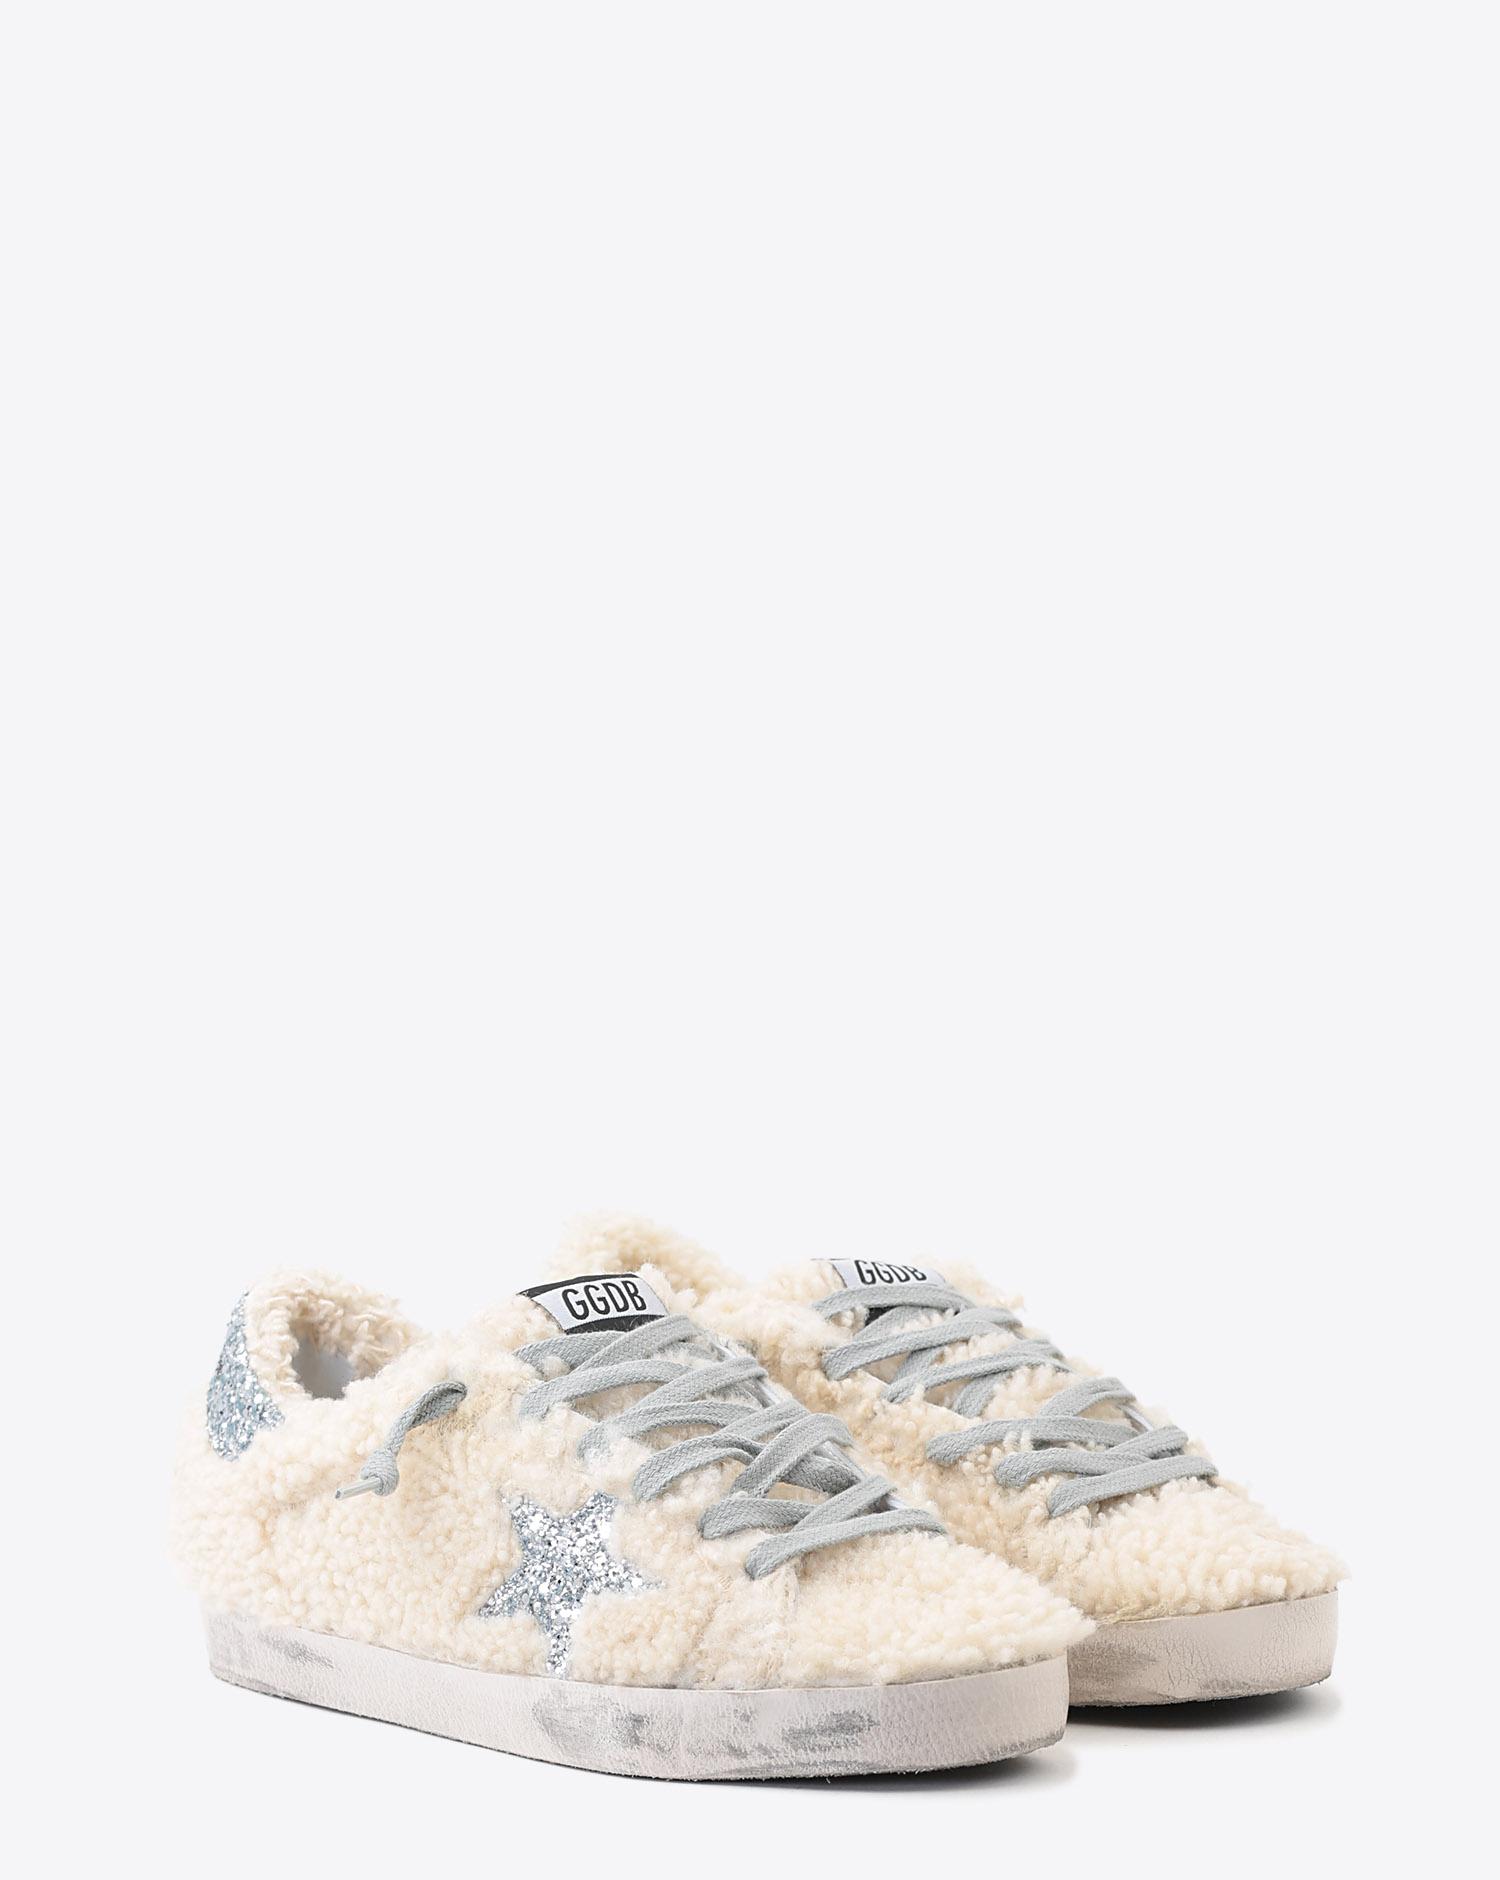 Golden Goose Woman Pré-Collection Sneakers Superstar - Cream Shearling - Silver Glitter Star  